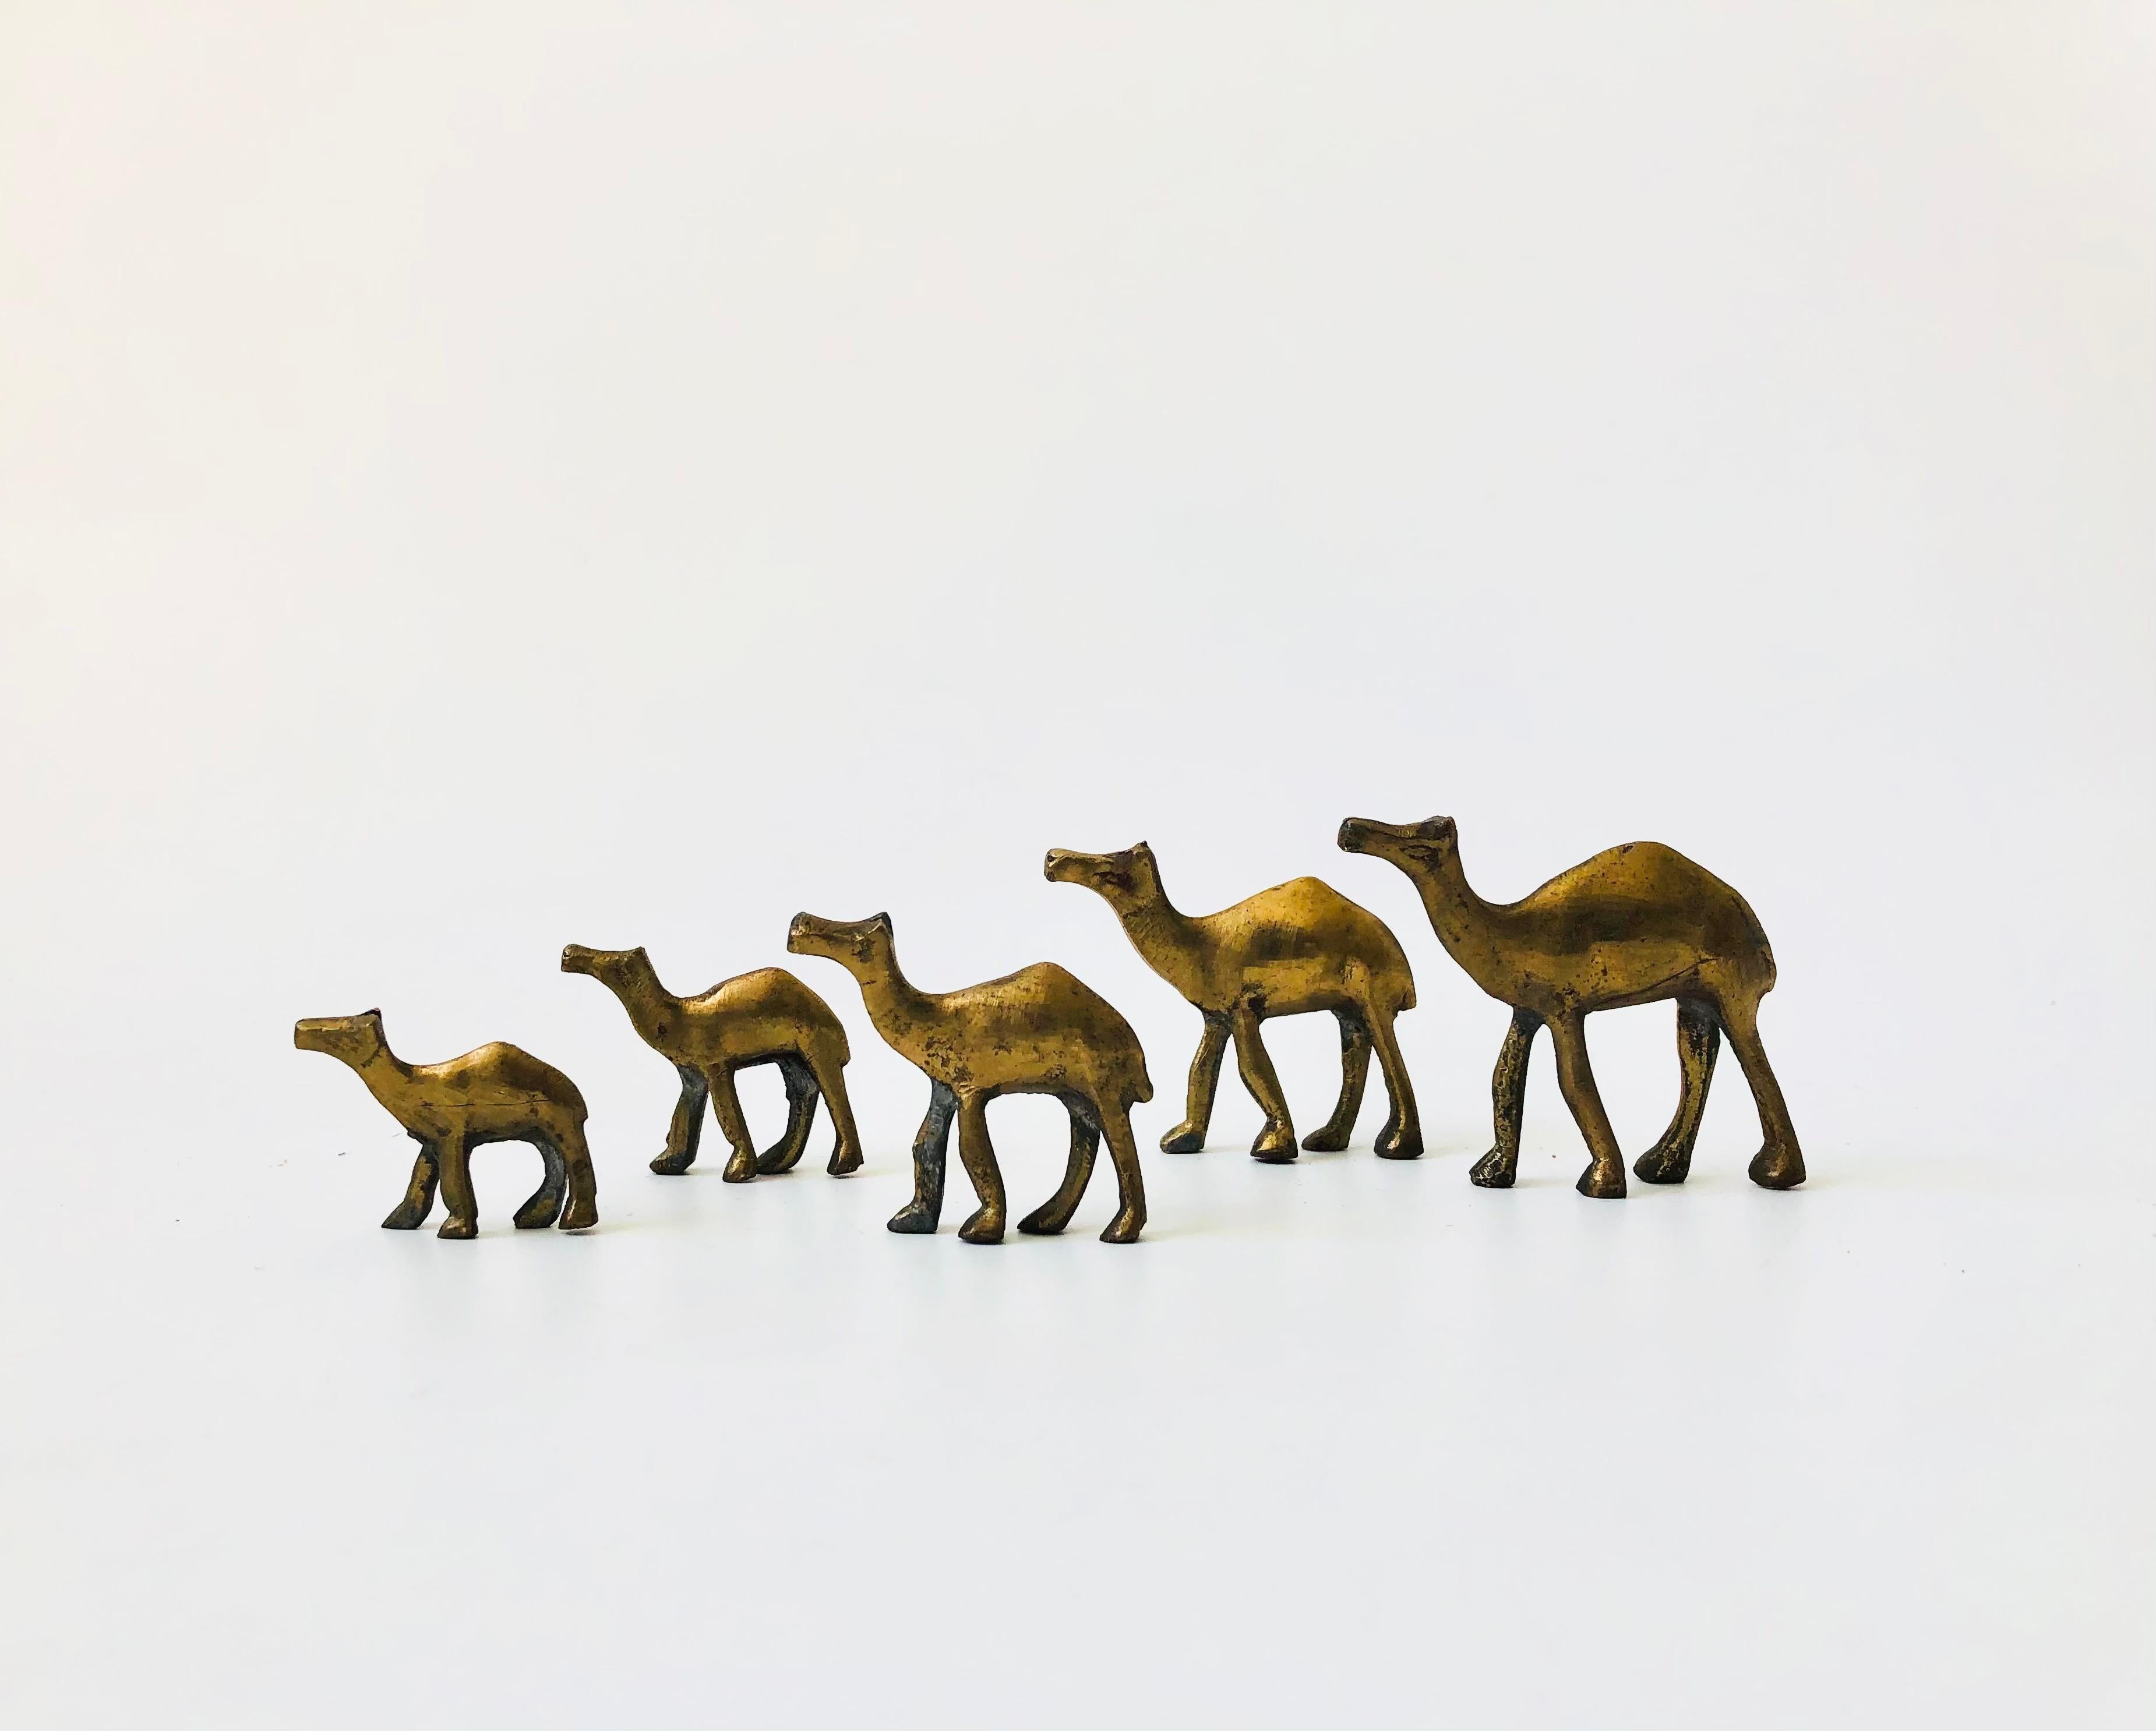 20th Century A Herd of Vintage Brass Camels - Set of 5